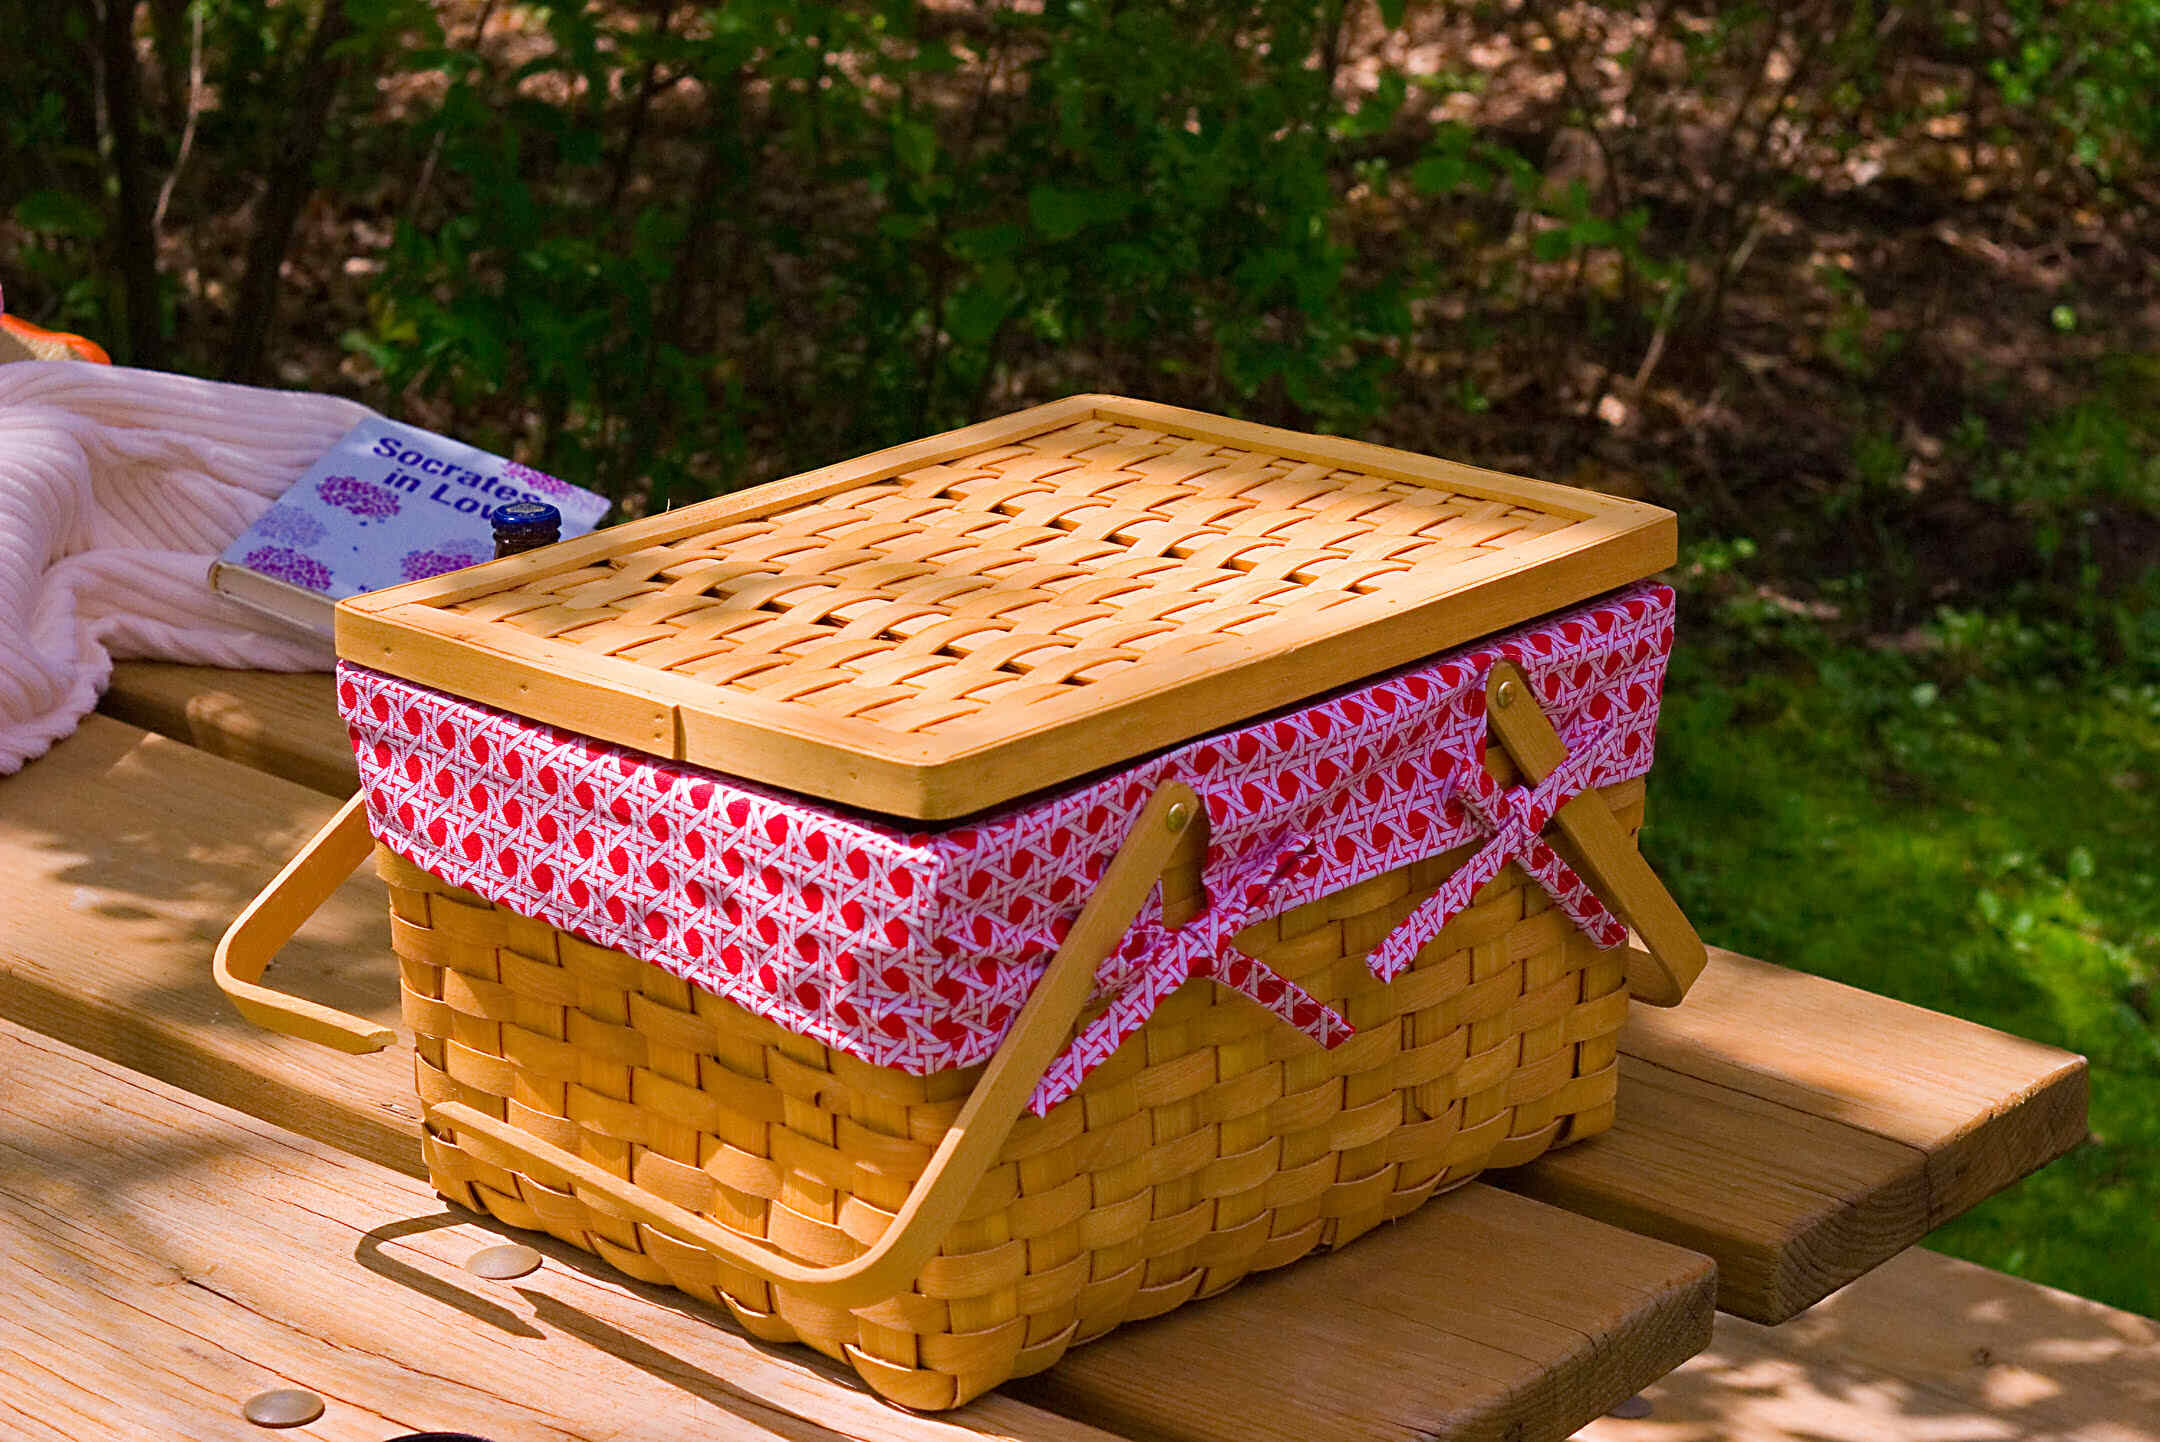 Picnic Basket Review: The Perfect Outdoor Dining Companion